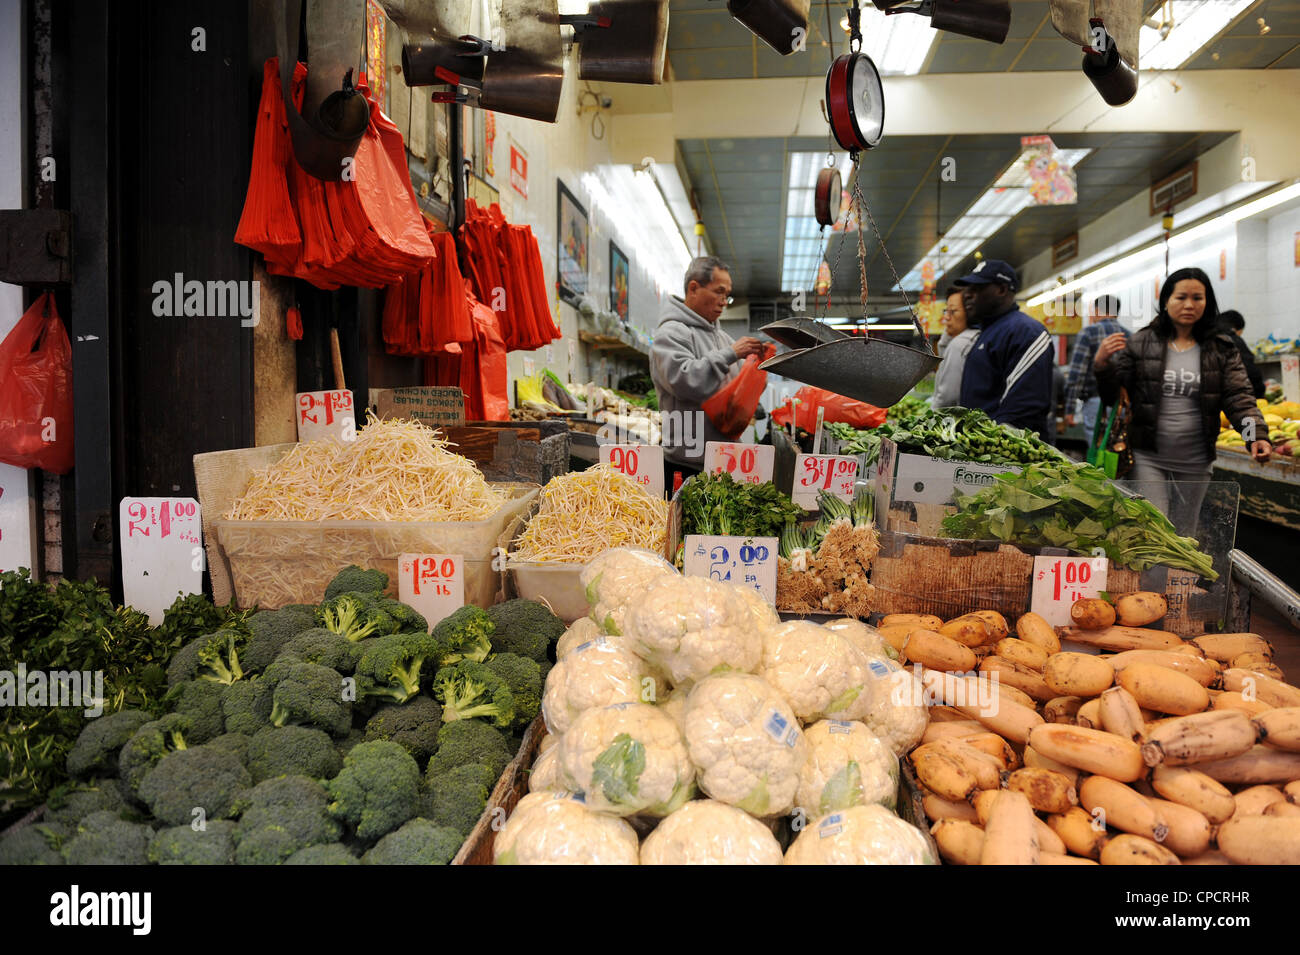 Shop selling vegetables in Chinatown New York Stock Photo